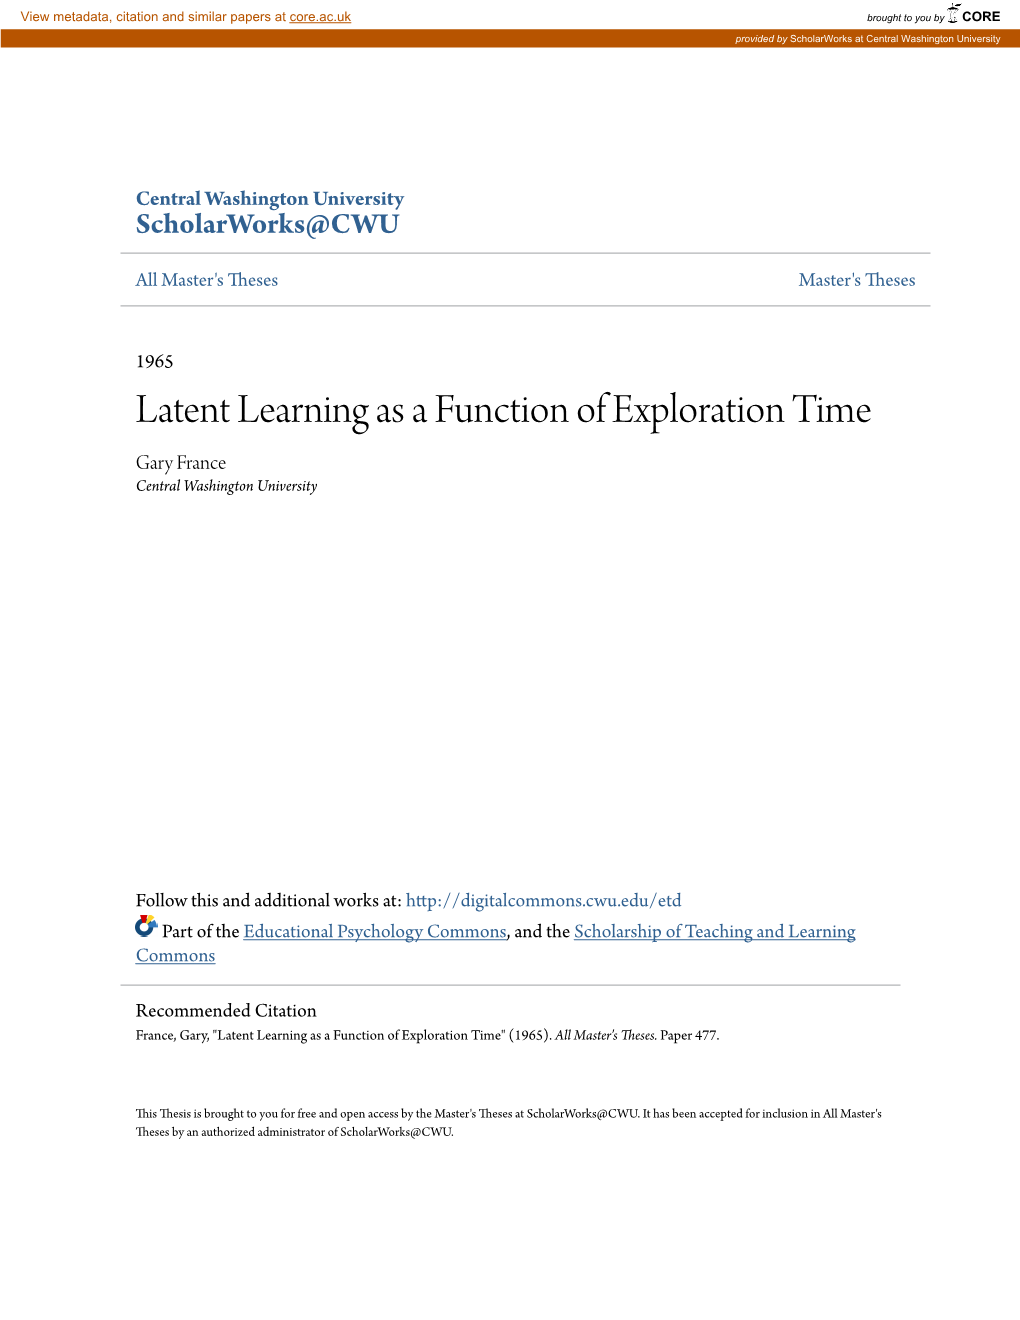 Latent Learning As a Function of Exploration Time Gary France Central Washington University